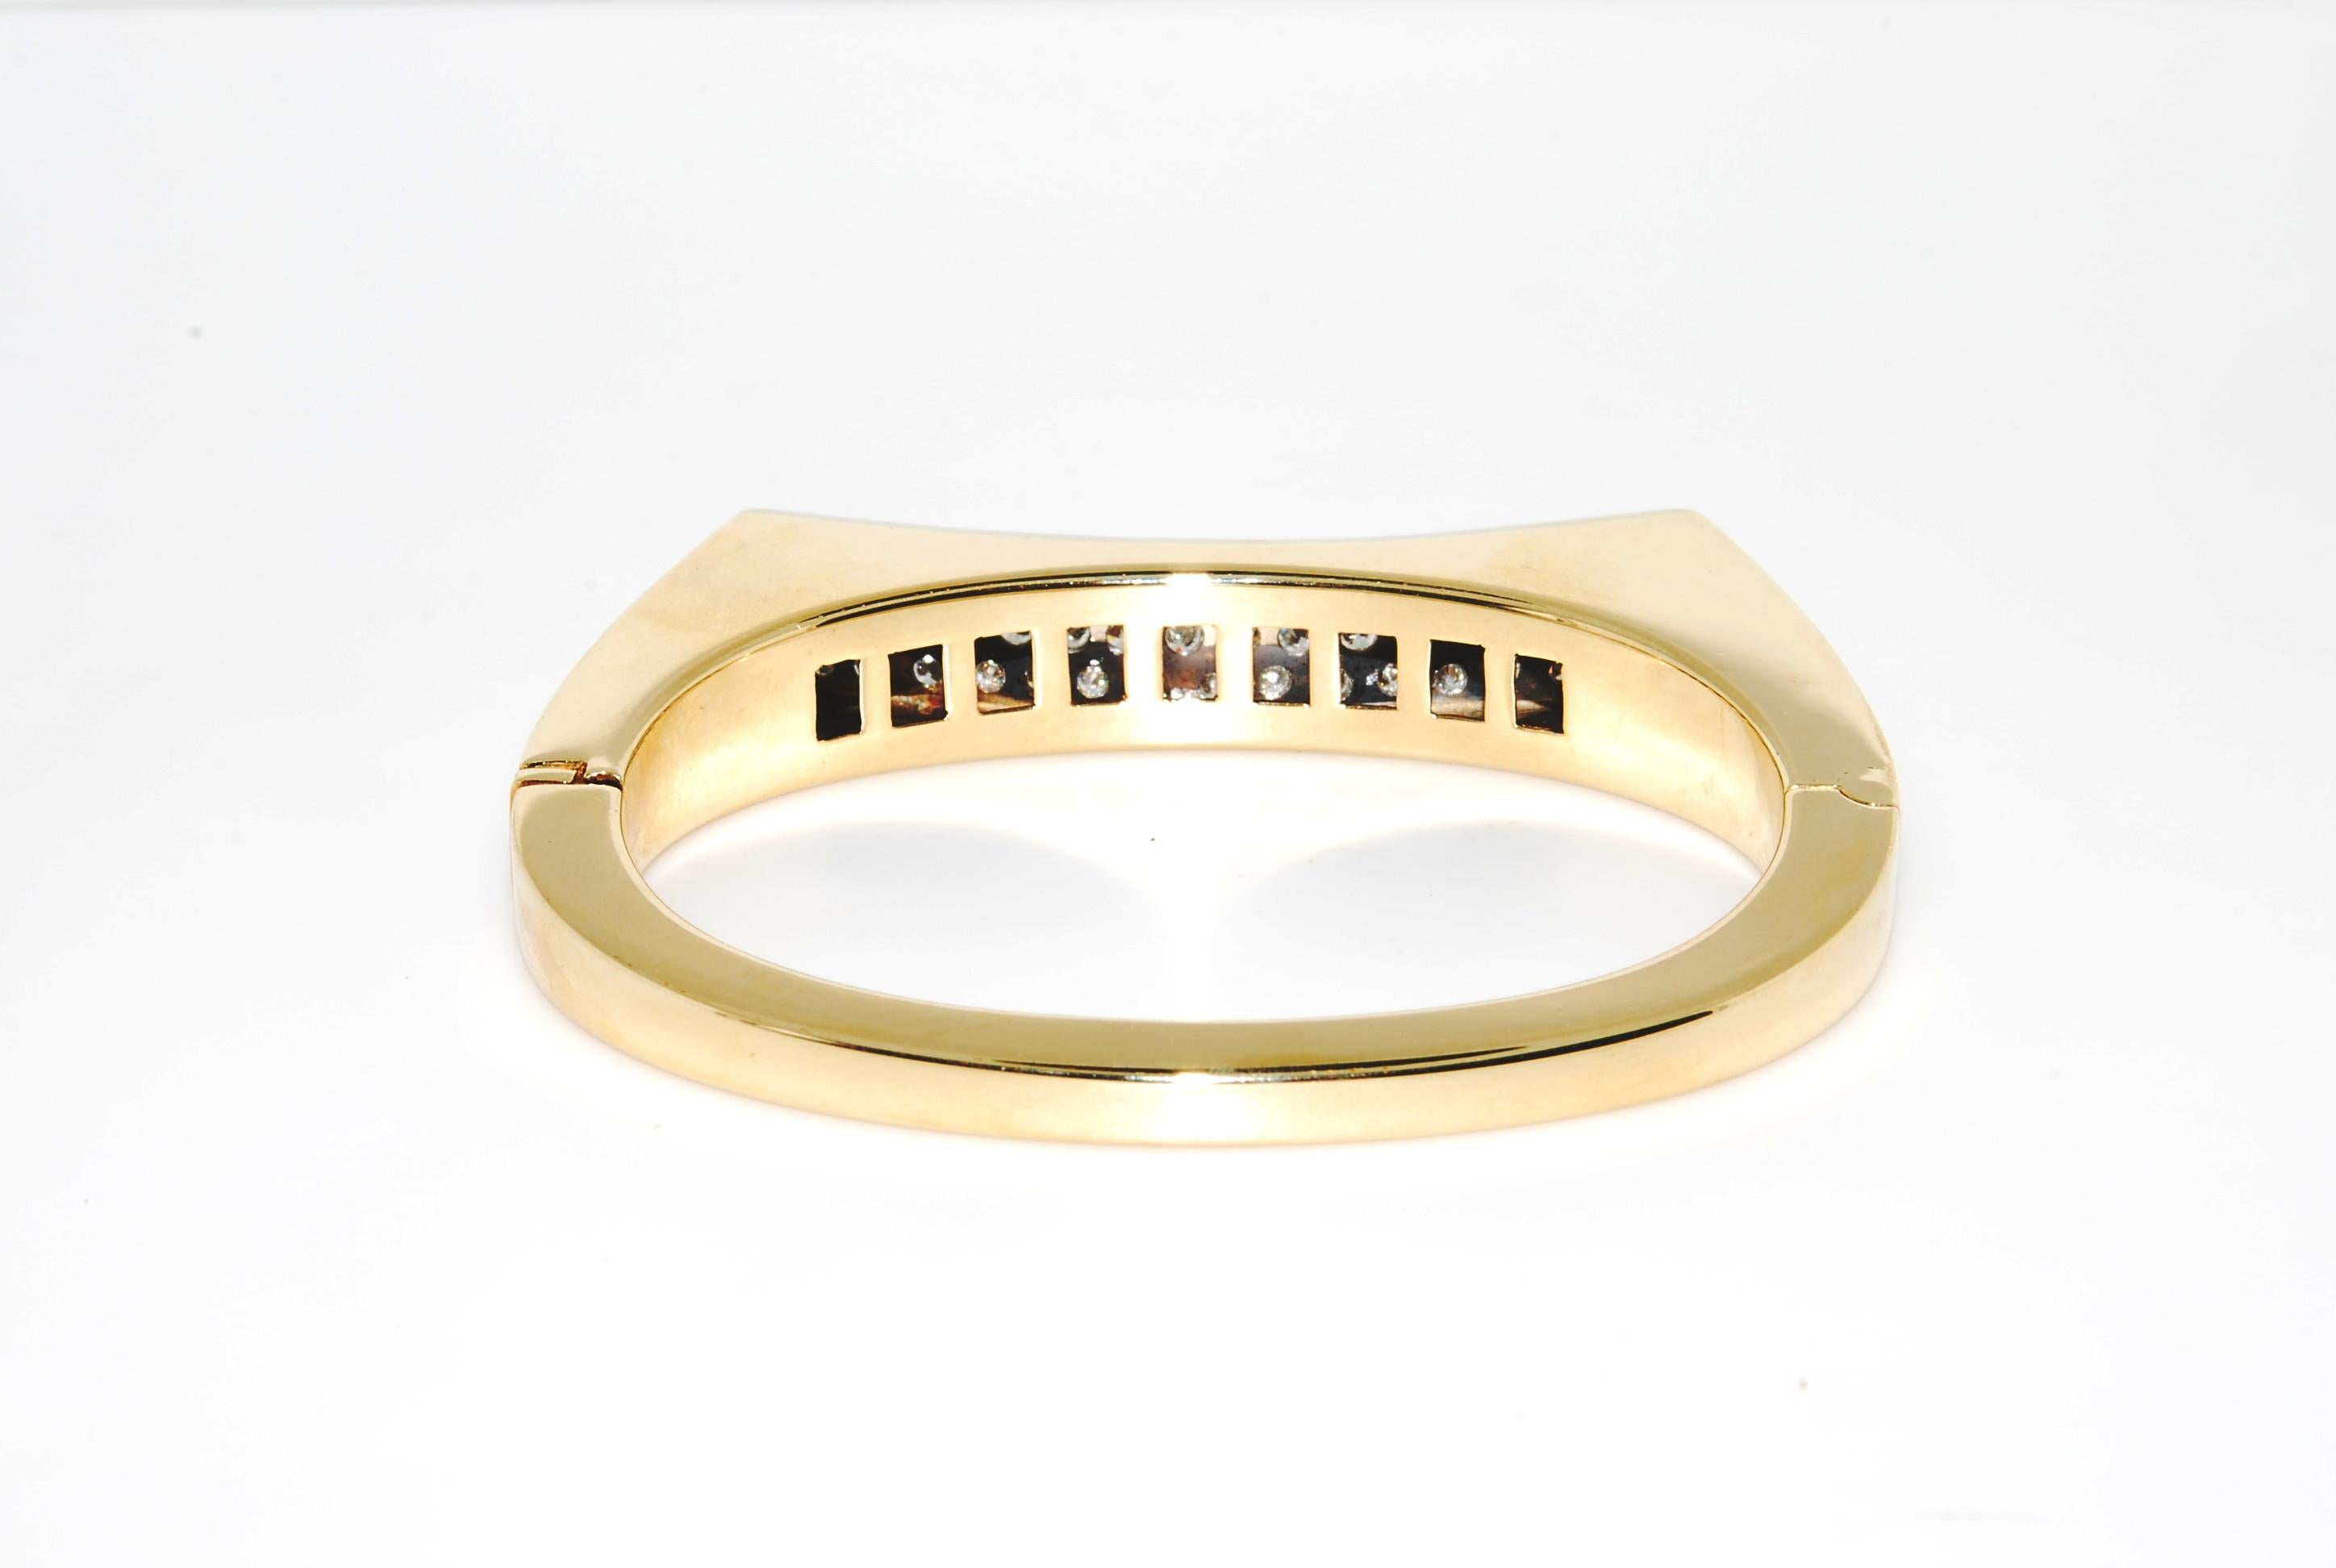 Round Cut Diamond Cuff Bracelet in 14 Karat Yellow Gold, Made in Italy, Almost 4 Carat For Sale